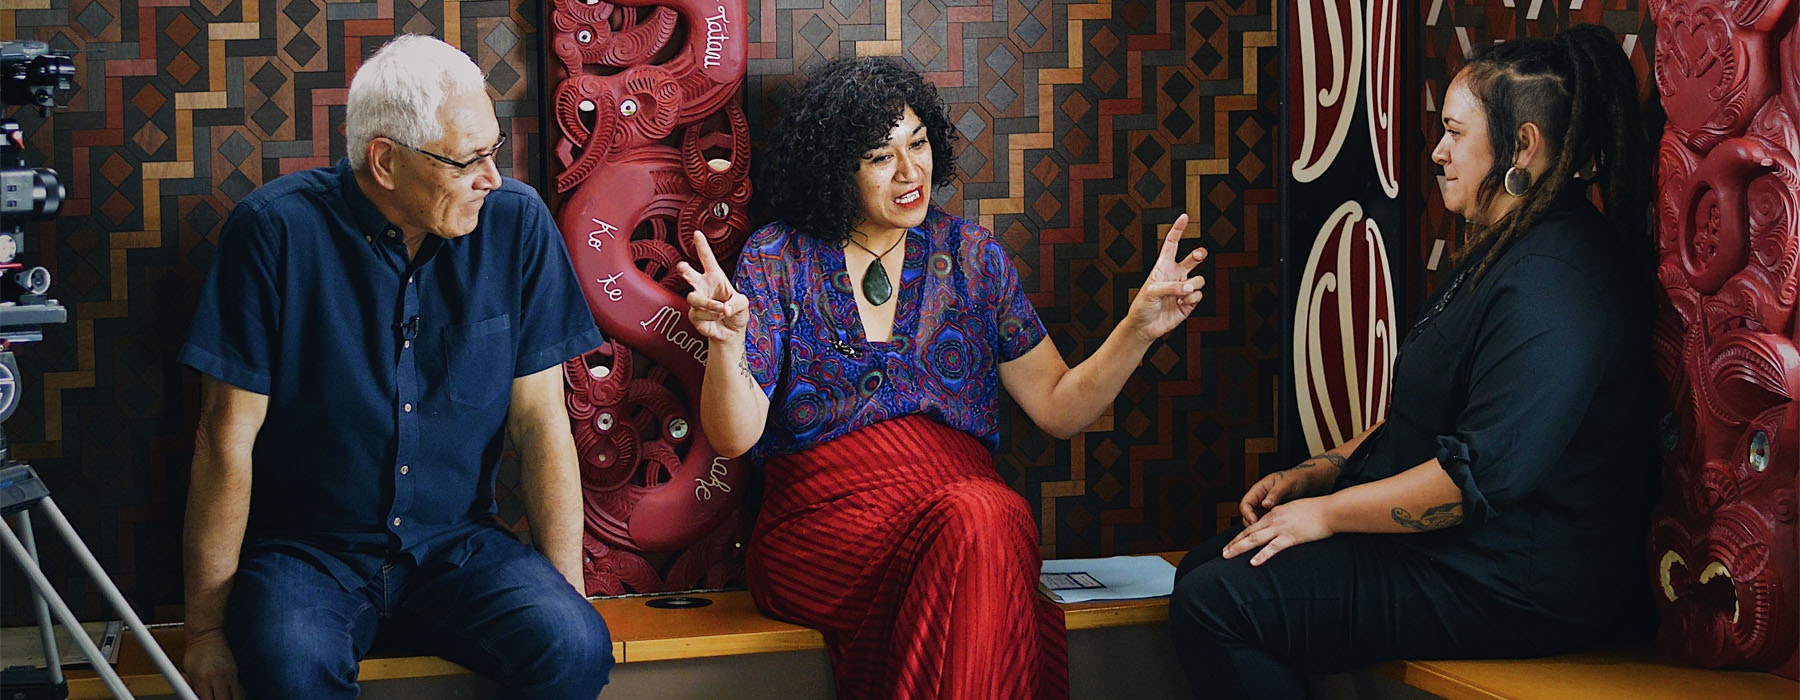 Three people sit down in a marae to talk. A camera filming them can be seen partially off-screen